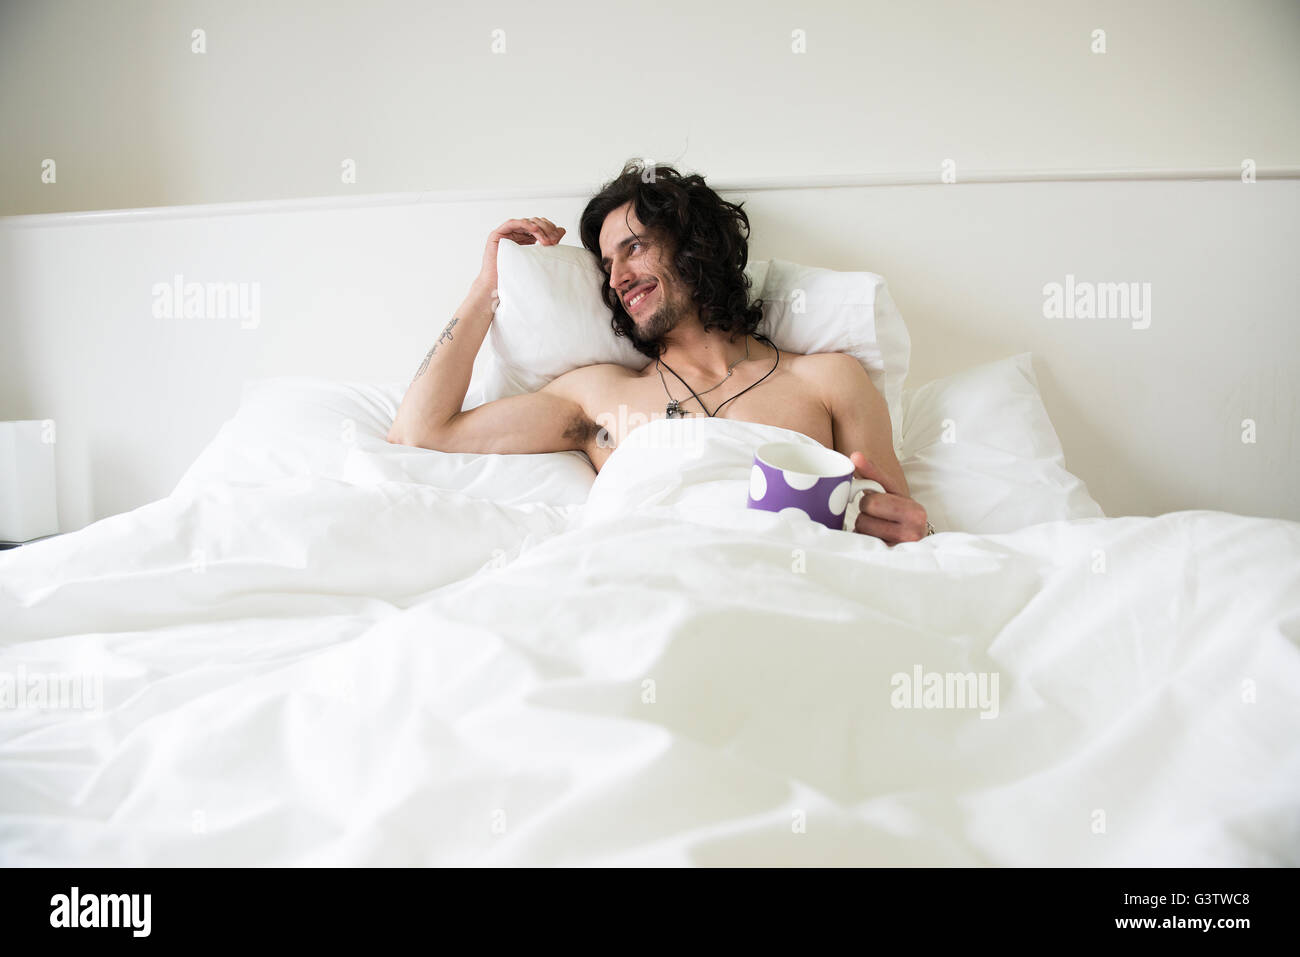 A young man with long hair lying in a bed with a cup of tea looking happy. Stock Photo